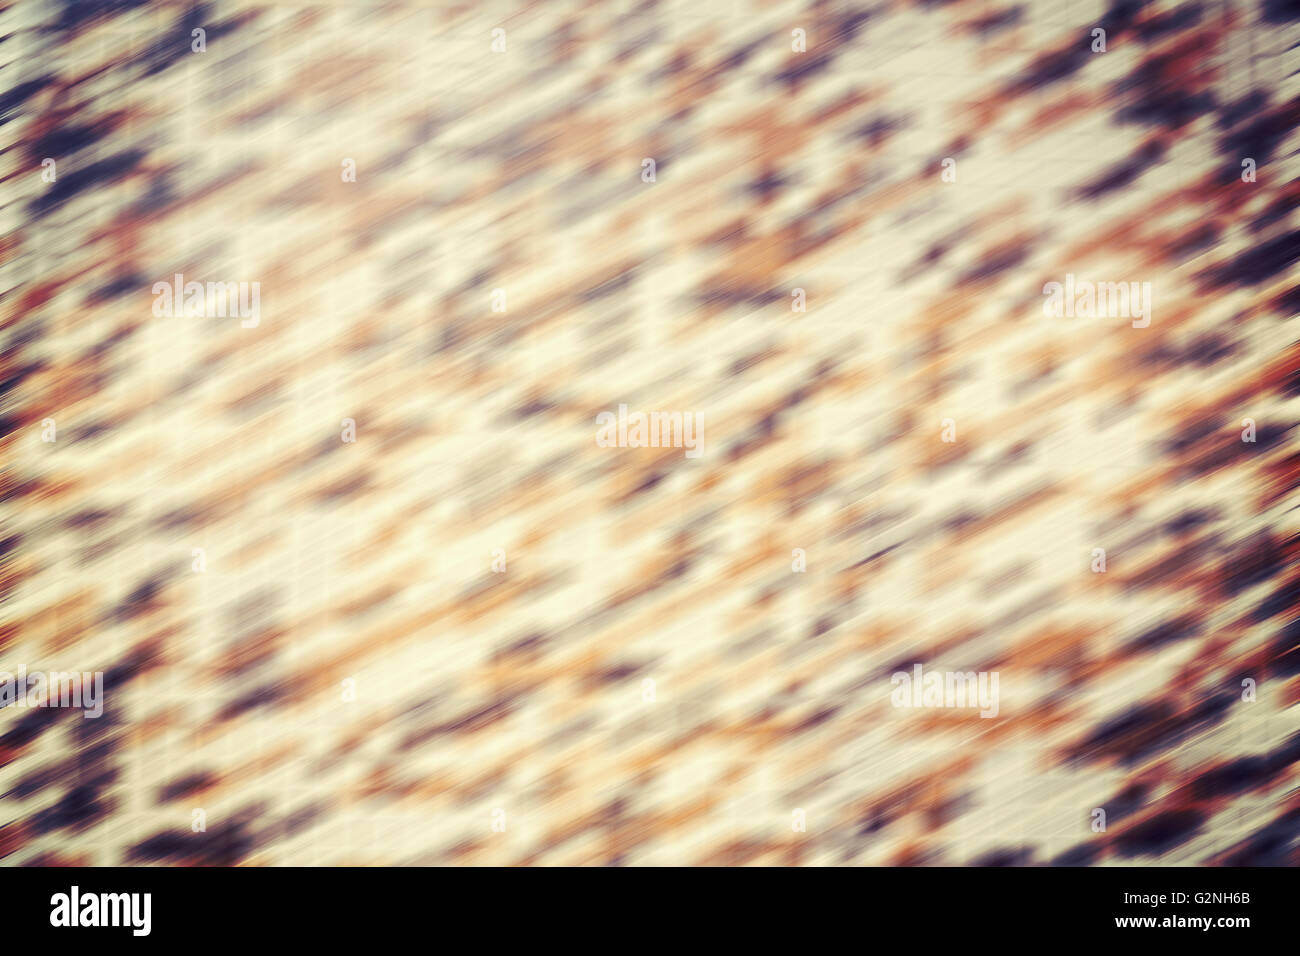 Abstract background made of blurred mosaic. Stock Photo